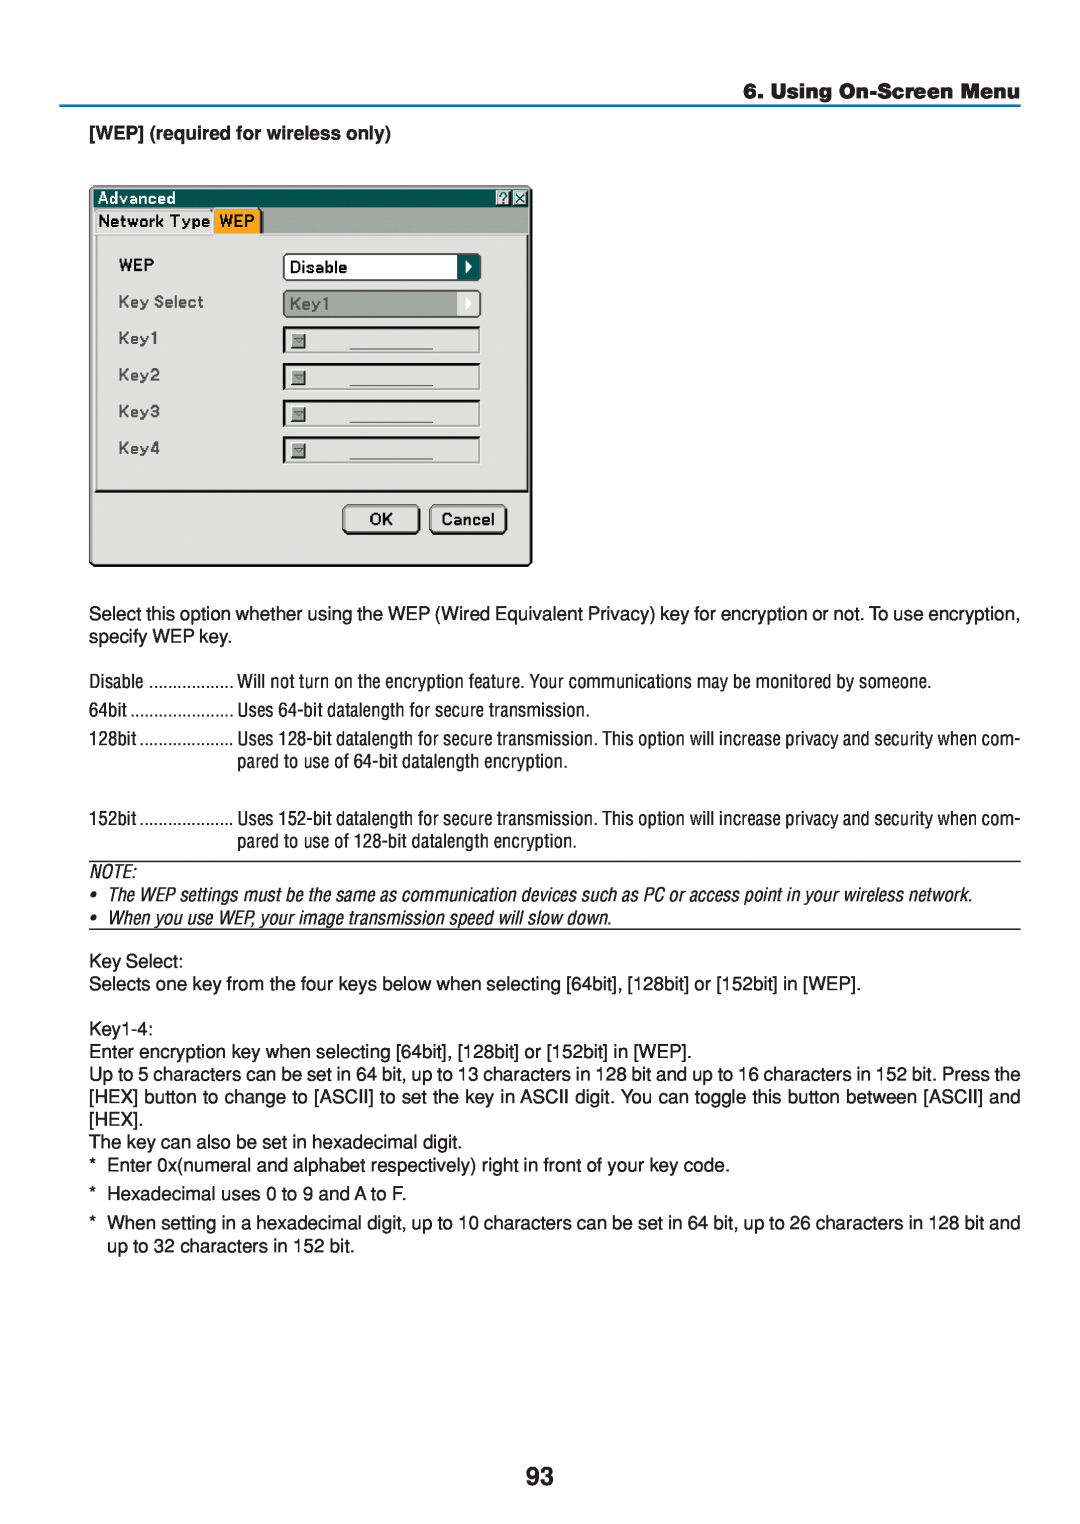 Dukane 8808 user manual Using On-Screen Menu, WEP required for wireless only 